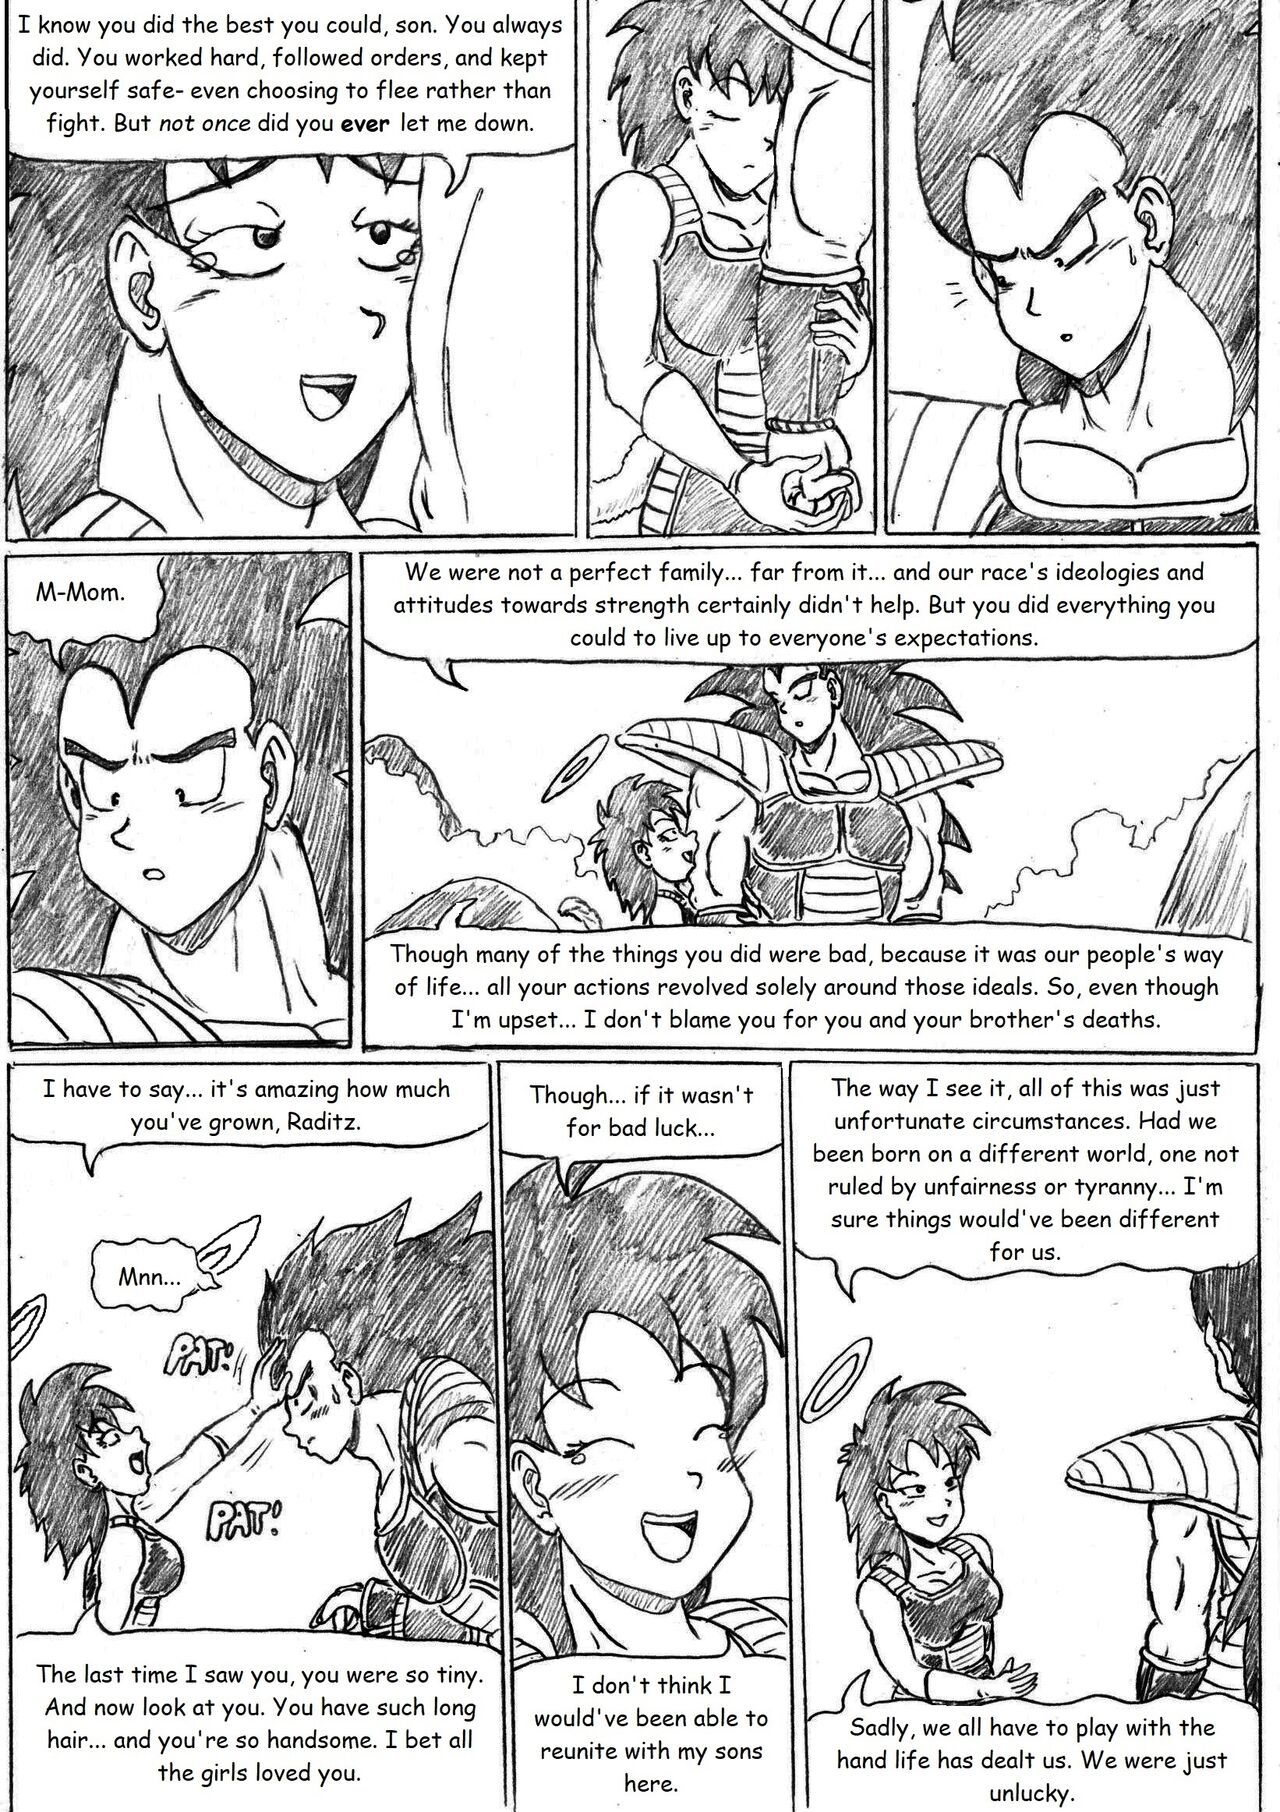 [TheWriteFiction] Dragonball Z Golden Age - Chapter 5 - Teamwork (Ongoing) 8